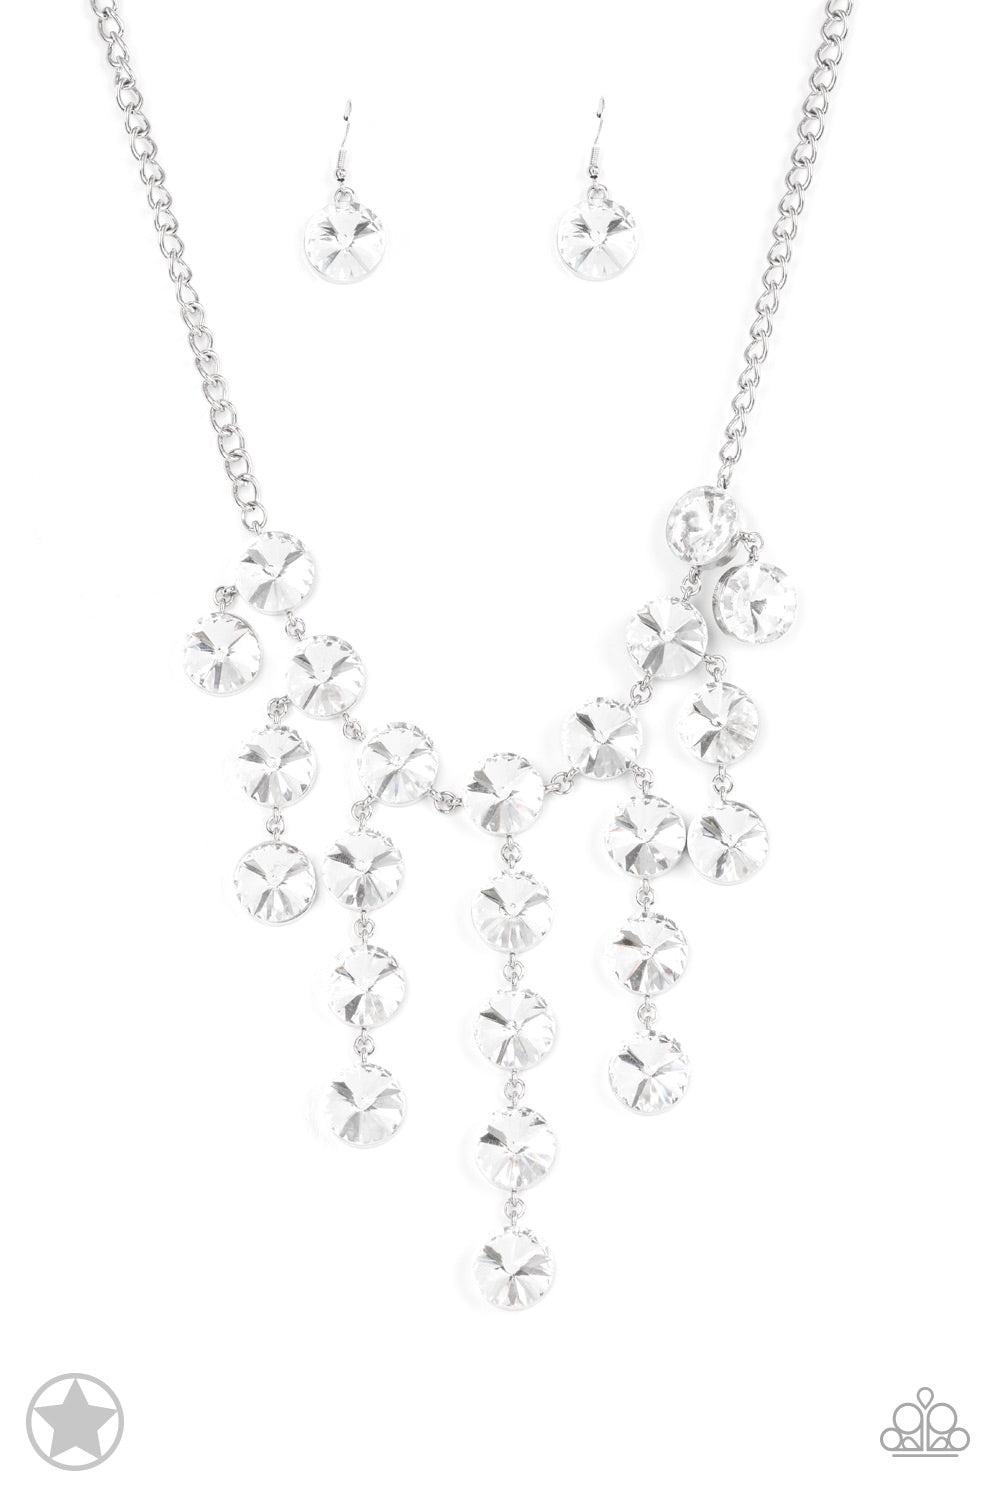 Spotlight Stunner Blockbuster Necklace - Paparazzi Accessories  Encased in sleek silver fittings, dramatically oversized white rhinestones delicately link into twinkly tassels that taper off into a jaw-dropping fringe below the collar. Features an adjustable clasp closure.  All Paparazzi Accessories are lead free and nickel free!  Sold as one individual necklace. Includes one pair of matching earrings.